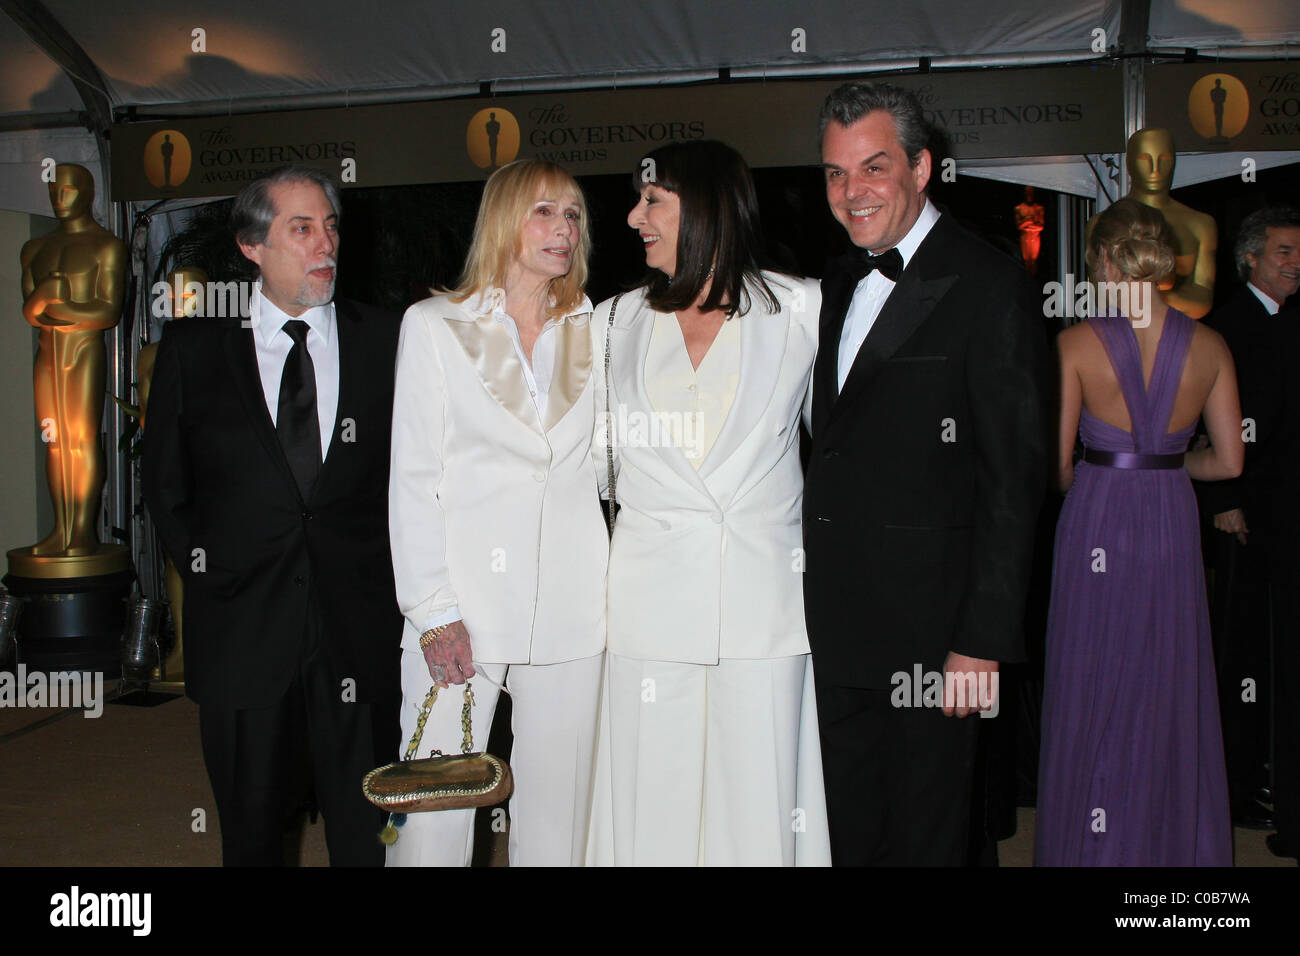 Sally Kellerman and actress Anjelica Huston Academy Of Motion Pictures And Sciences' 2009 Governors Awards Gala - Arrivals held Stock Photo